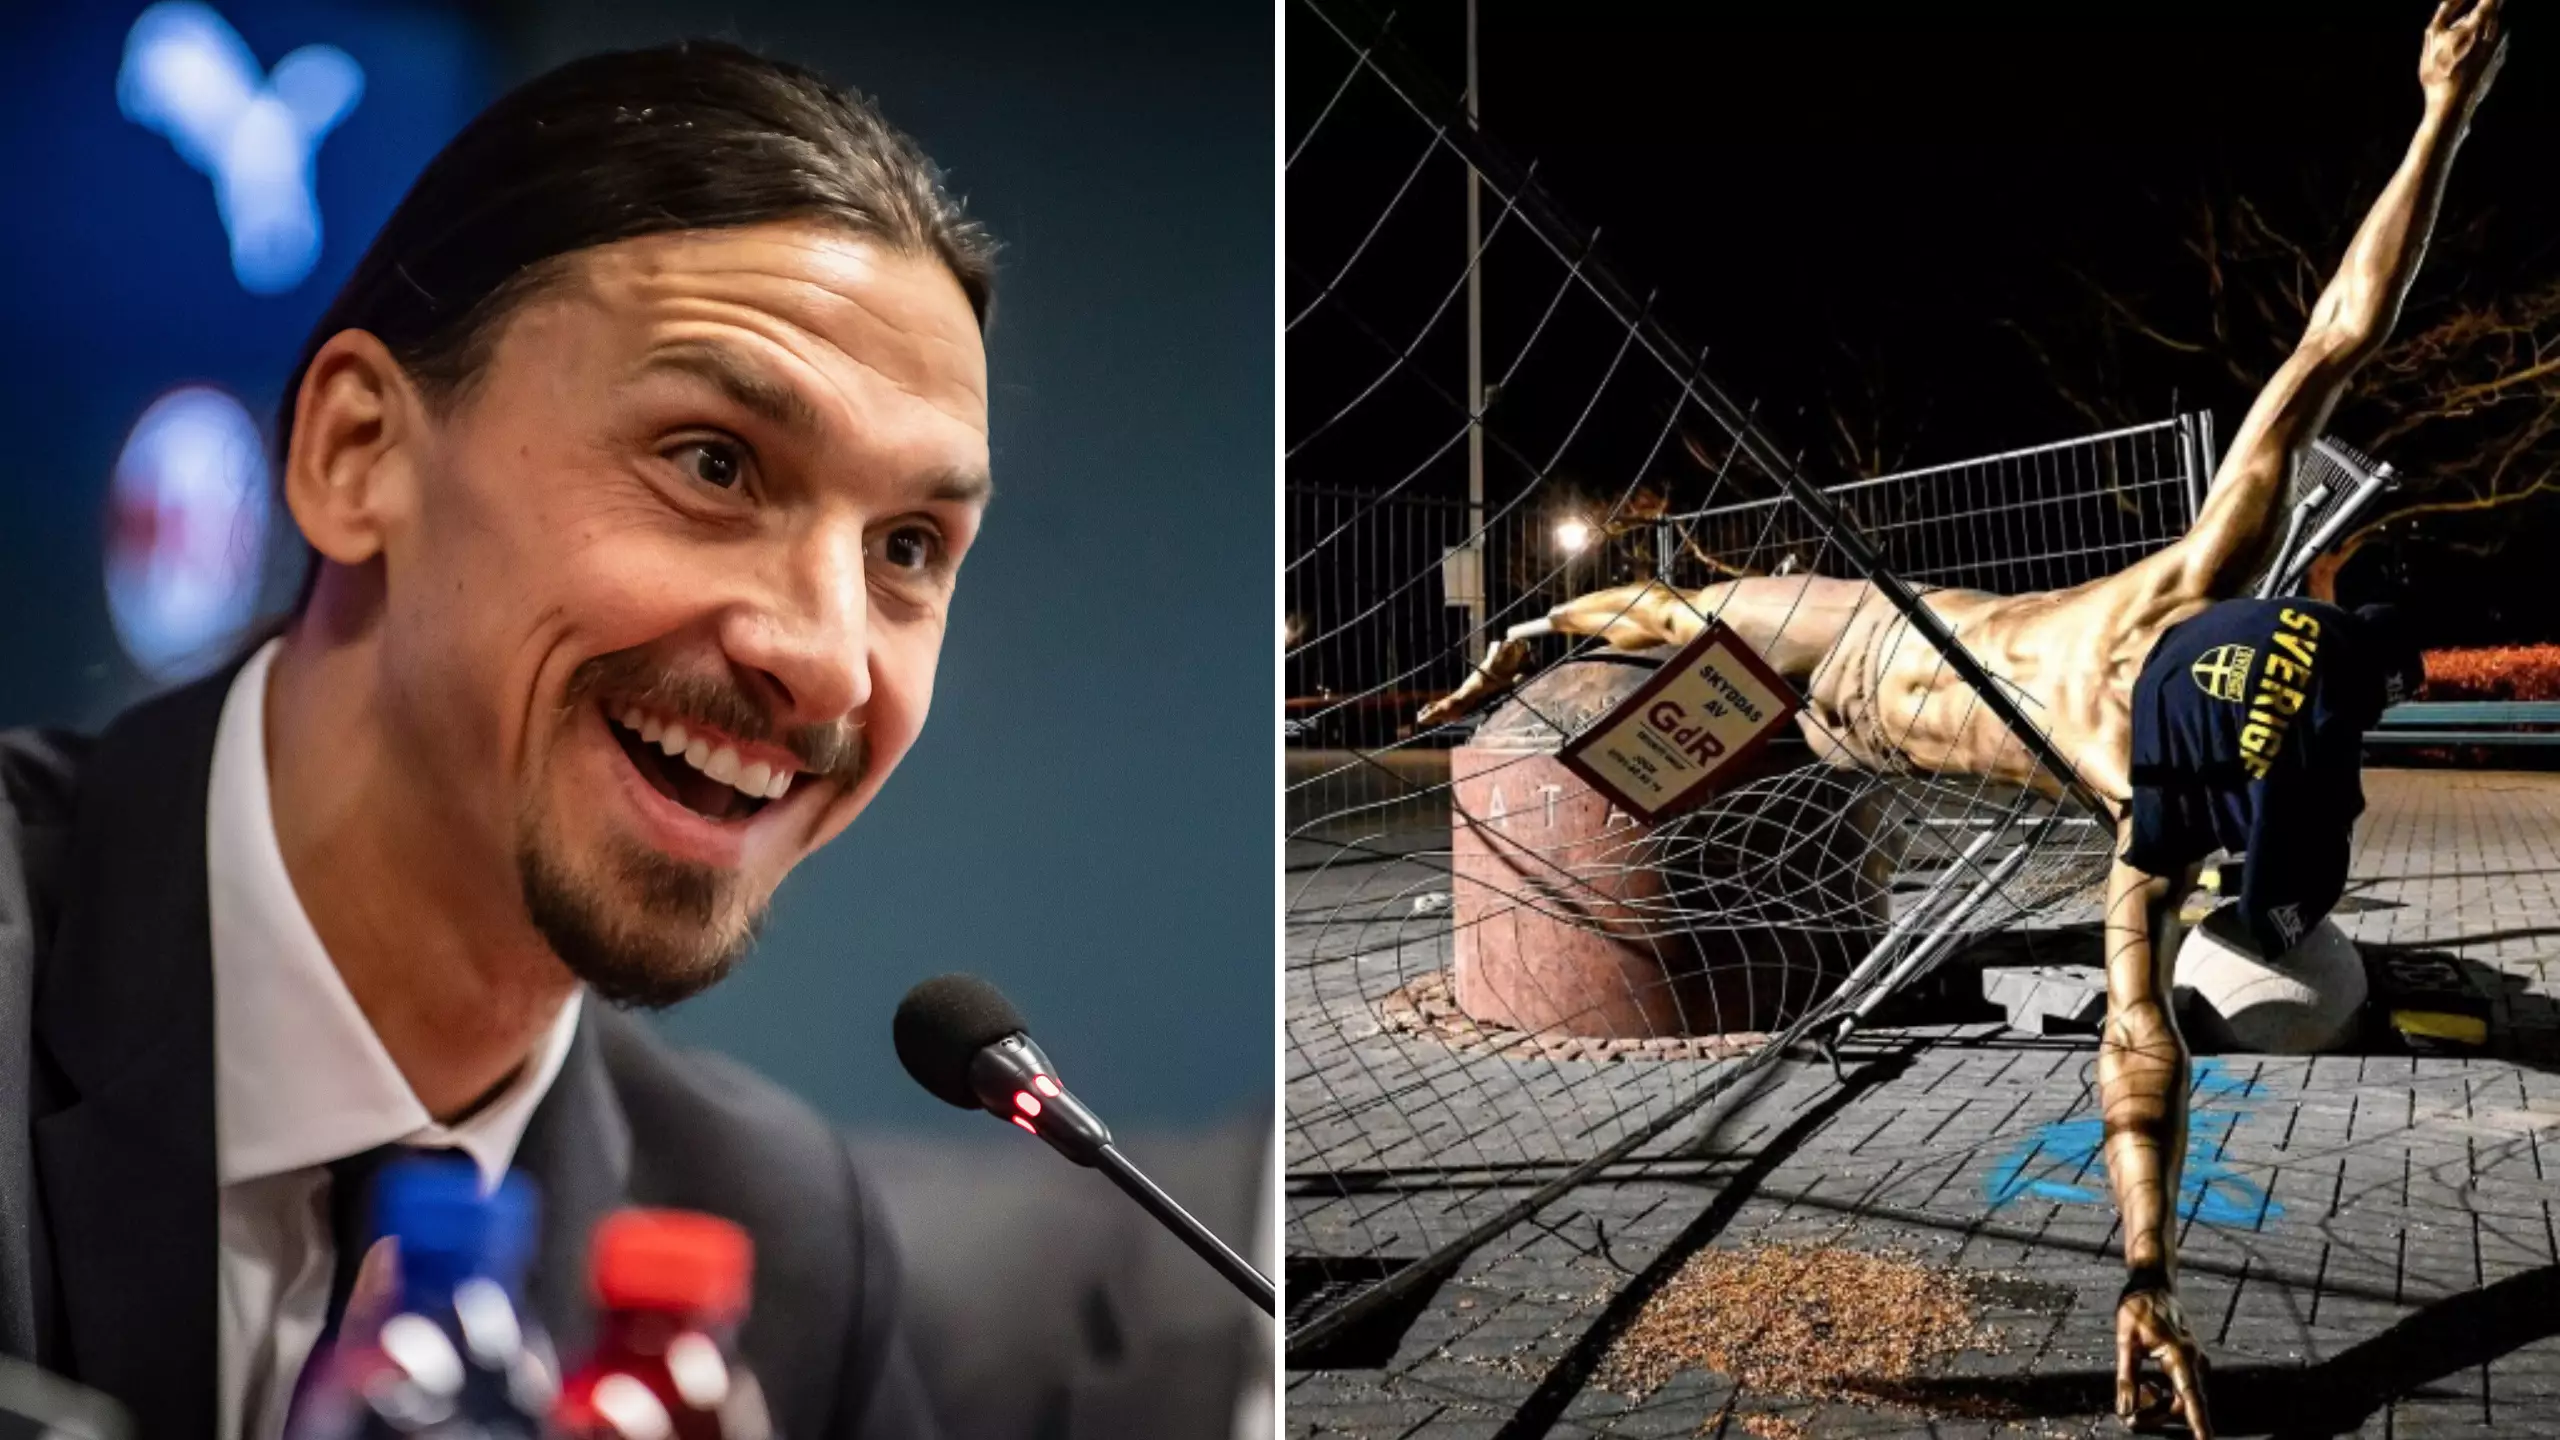 Zlatan Ibrahimovic's Statue Has Fallen Following Latest Attack By Vandals